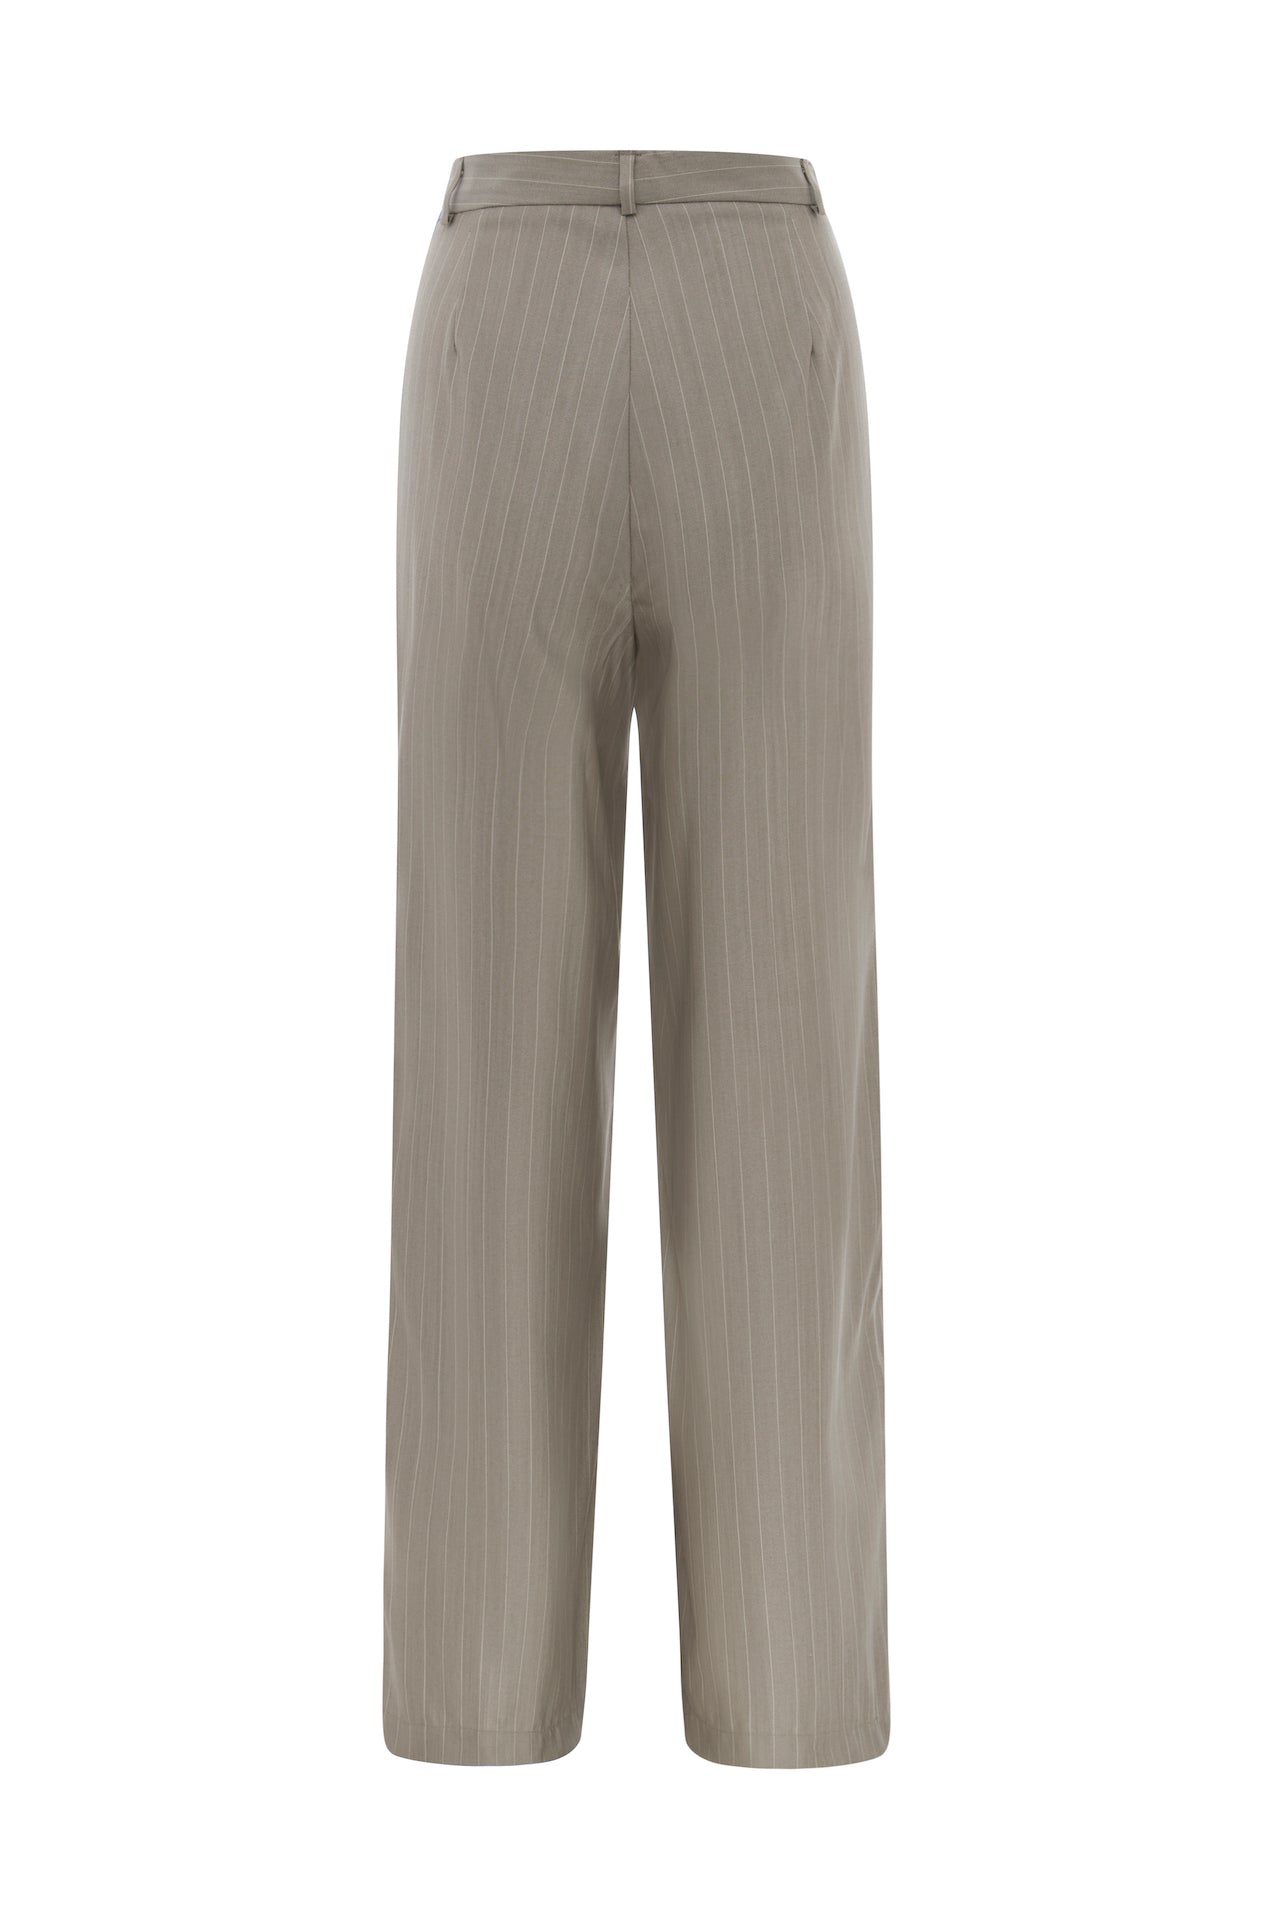 SAINT Tailored Pant in taupe pinstripe brown pure wool. made in Australia. 100% wool